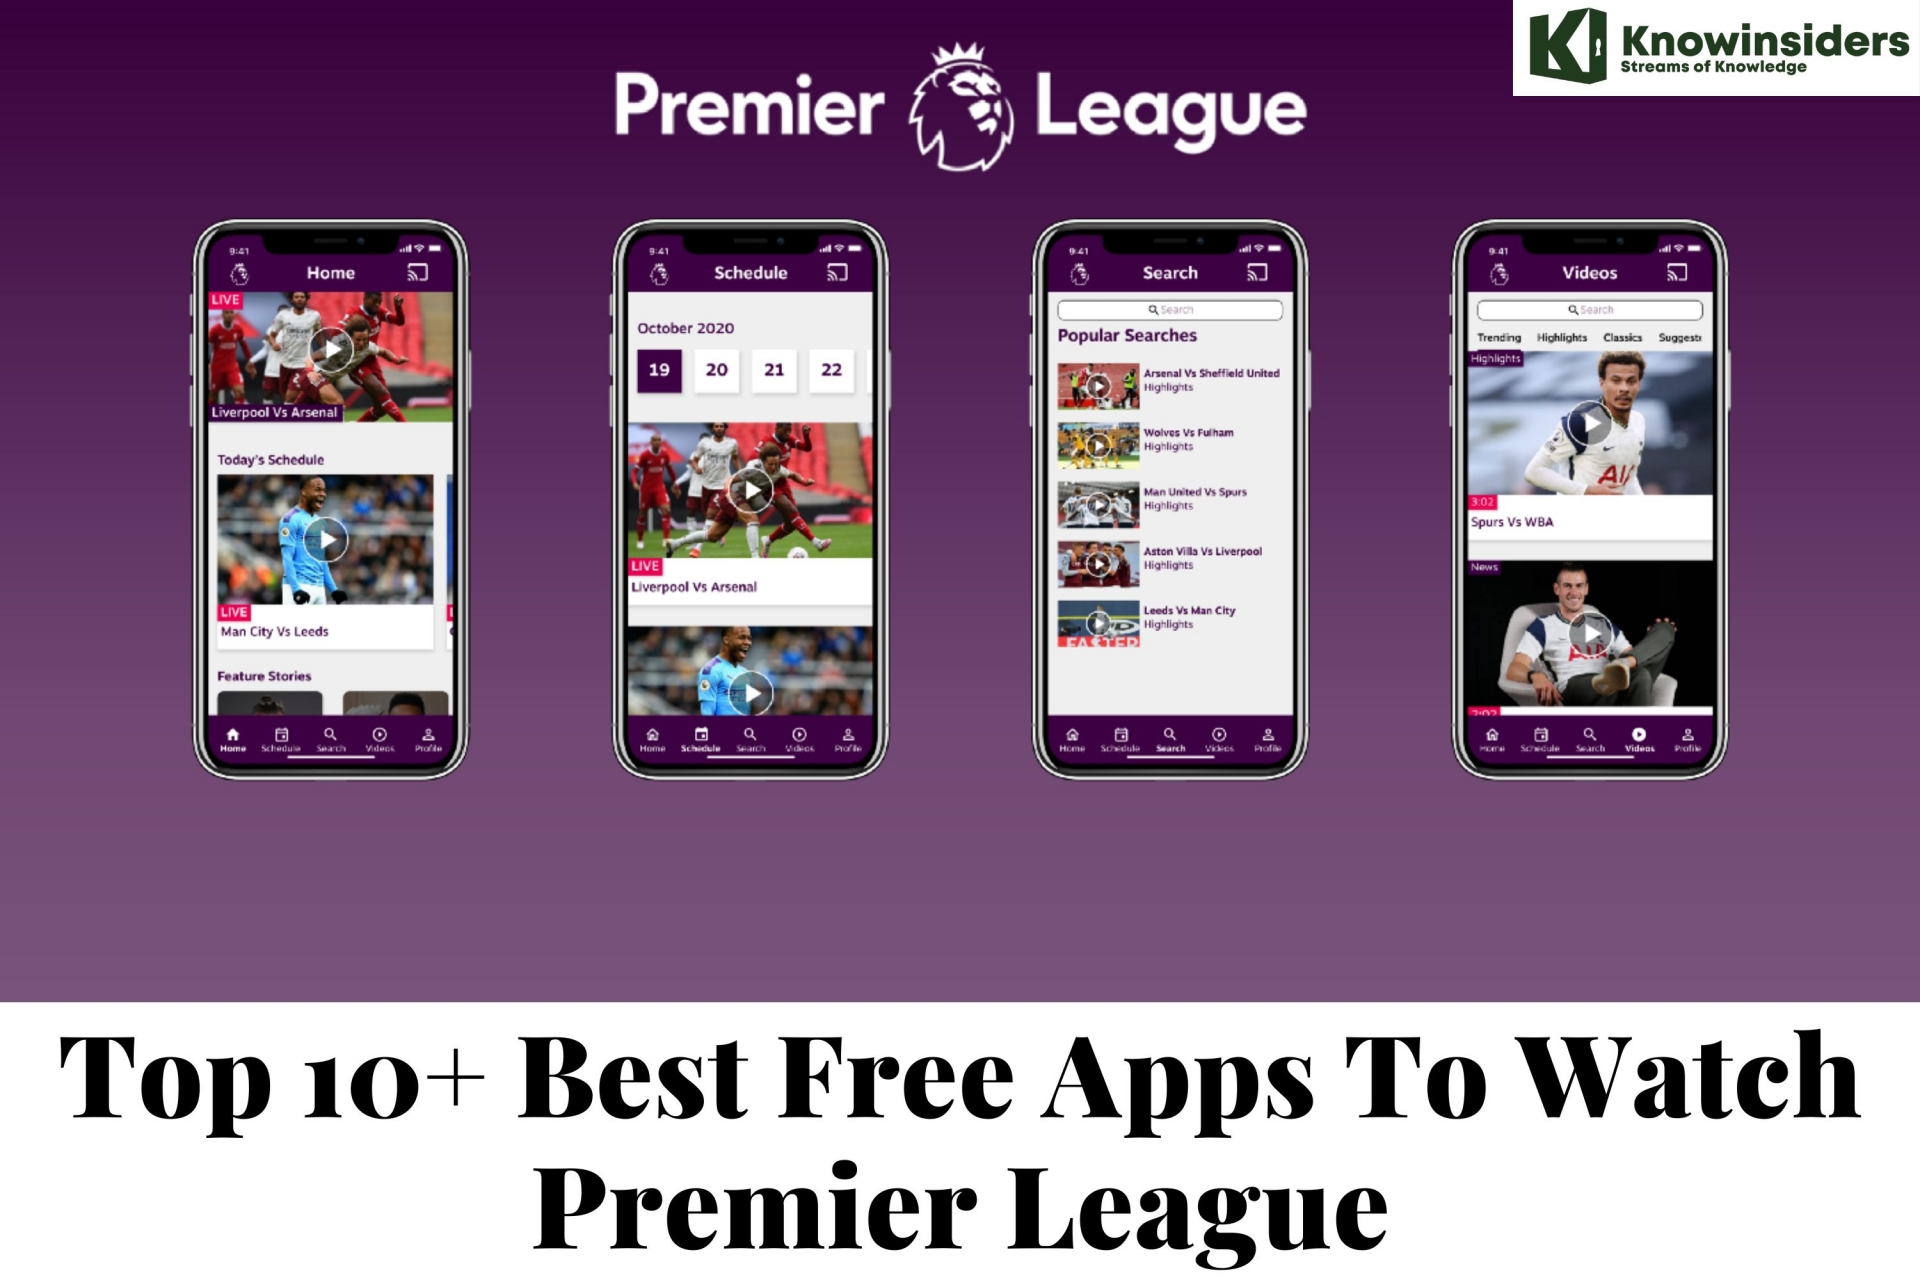 Top 10+ Best Free Apps To Watch English Premier League and Links to Download